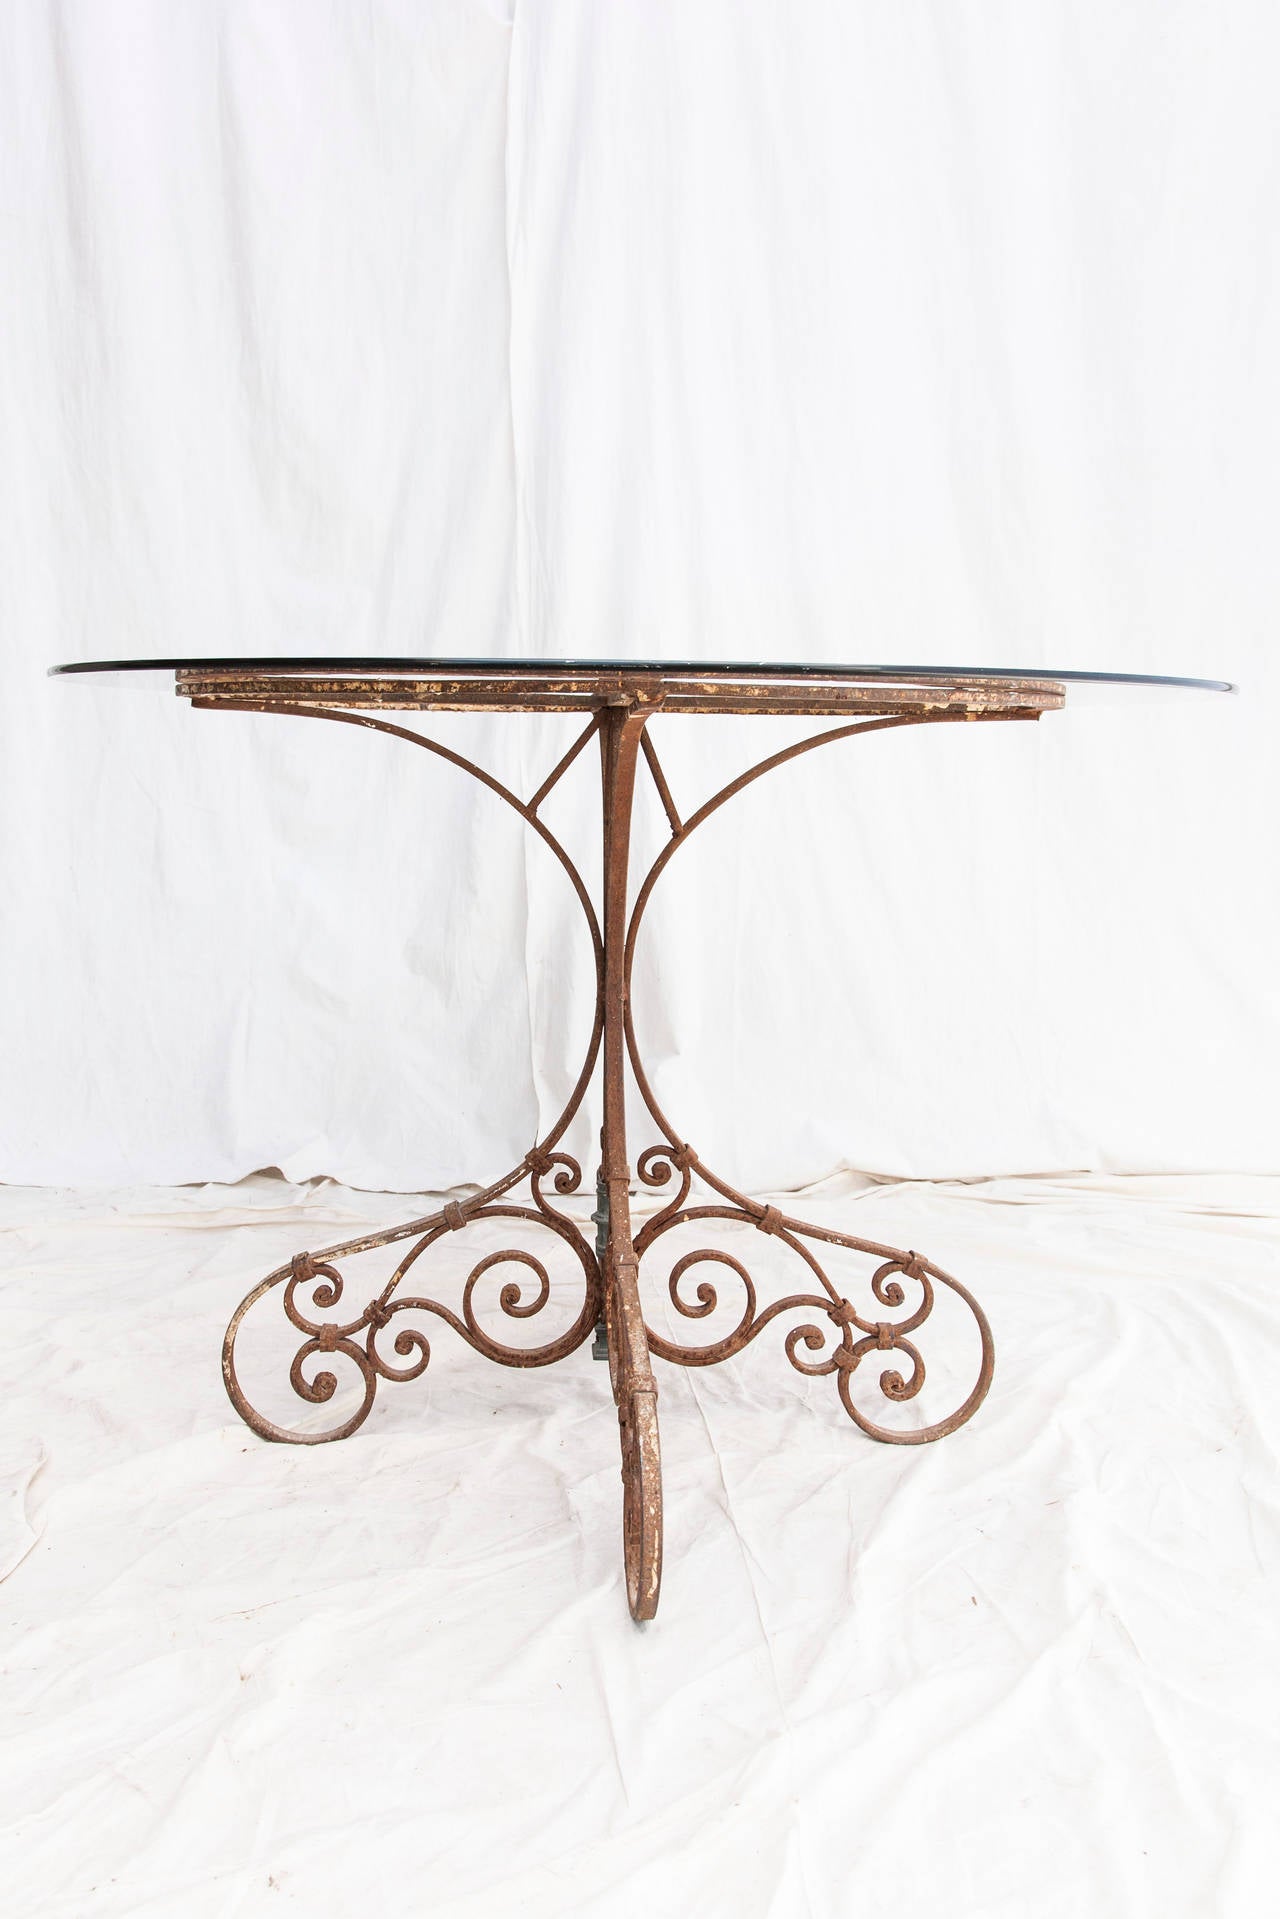 This late 19th century hand-forged iron table base has acquired a beautiful rustic patina. The smoked glass is very forgiving for outdoor dining, while the elegance of the hand-forged curvature in the base makes this table a great fit for an entry